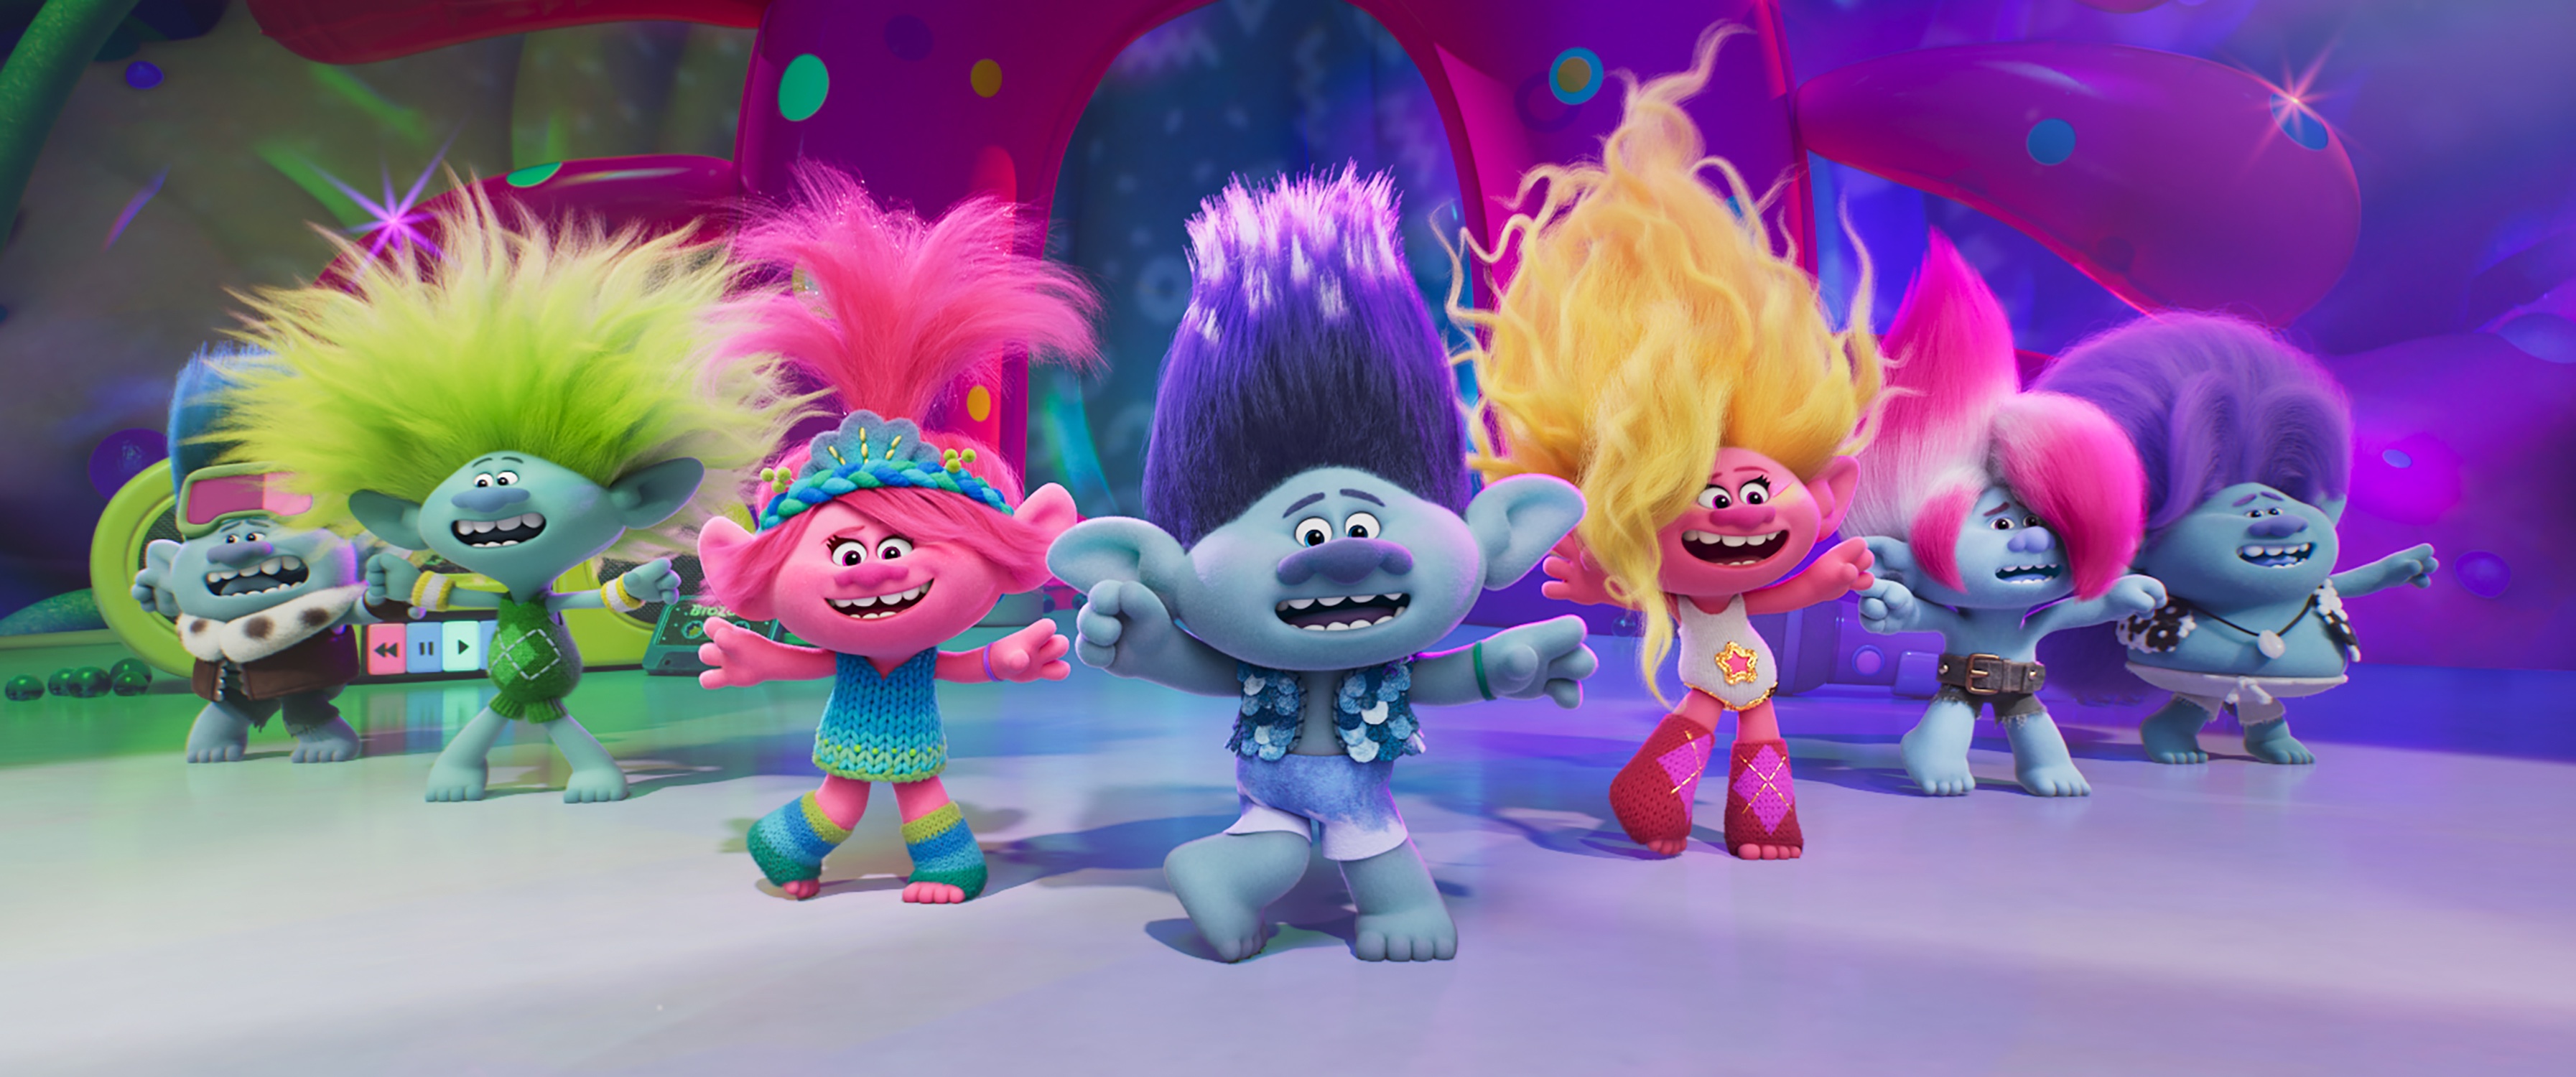 Trolls Band Together: Movie Review